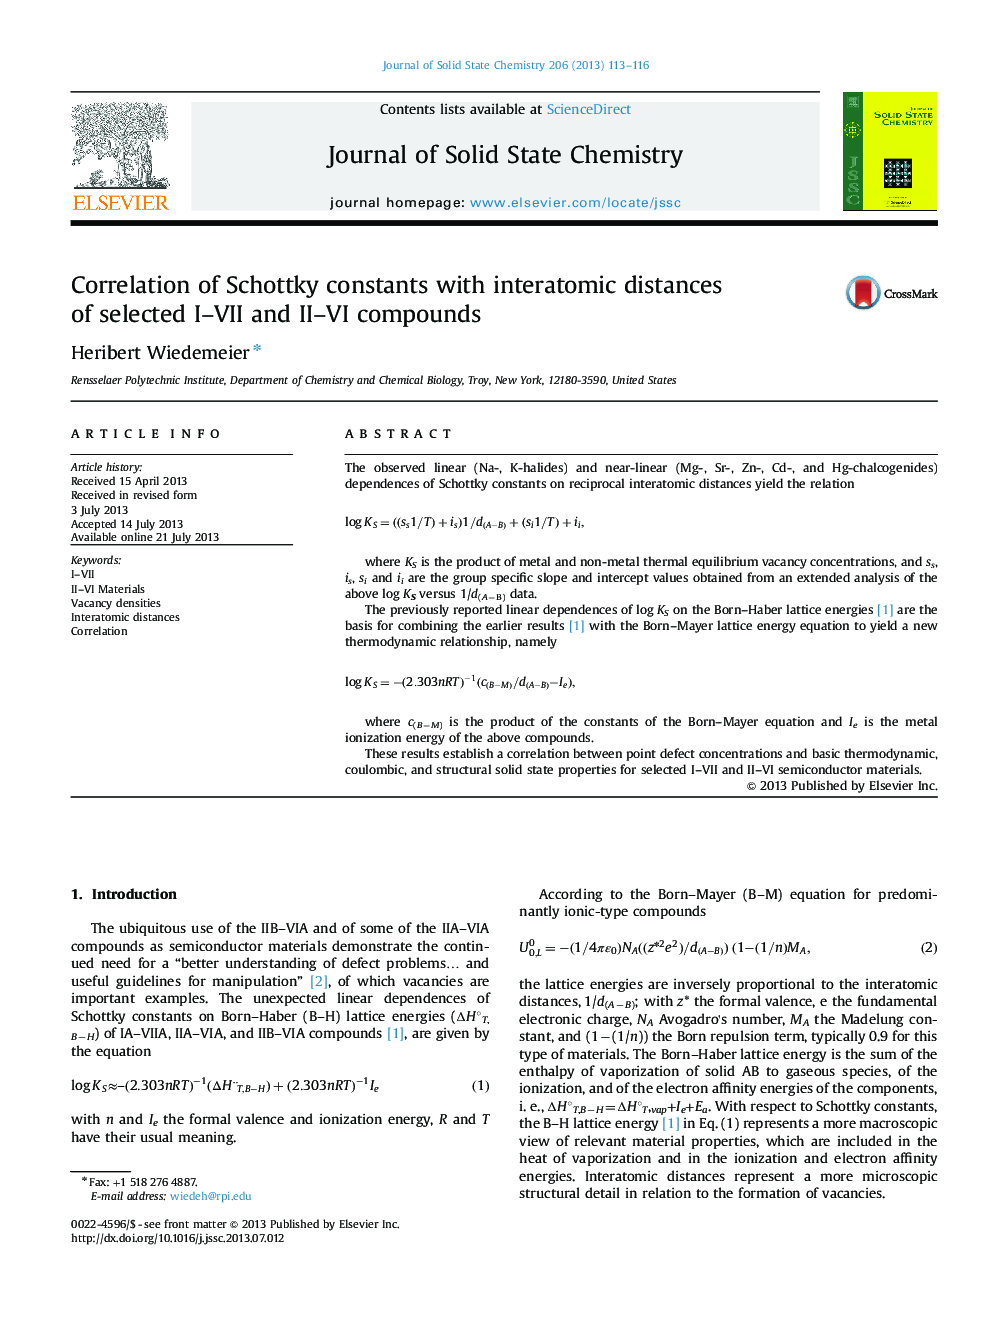 Correlation of Schottky constants with interatomic distances of selected I-VII and II-VI compounds